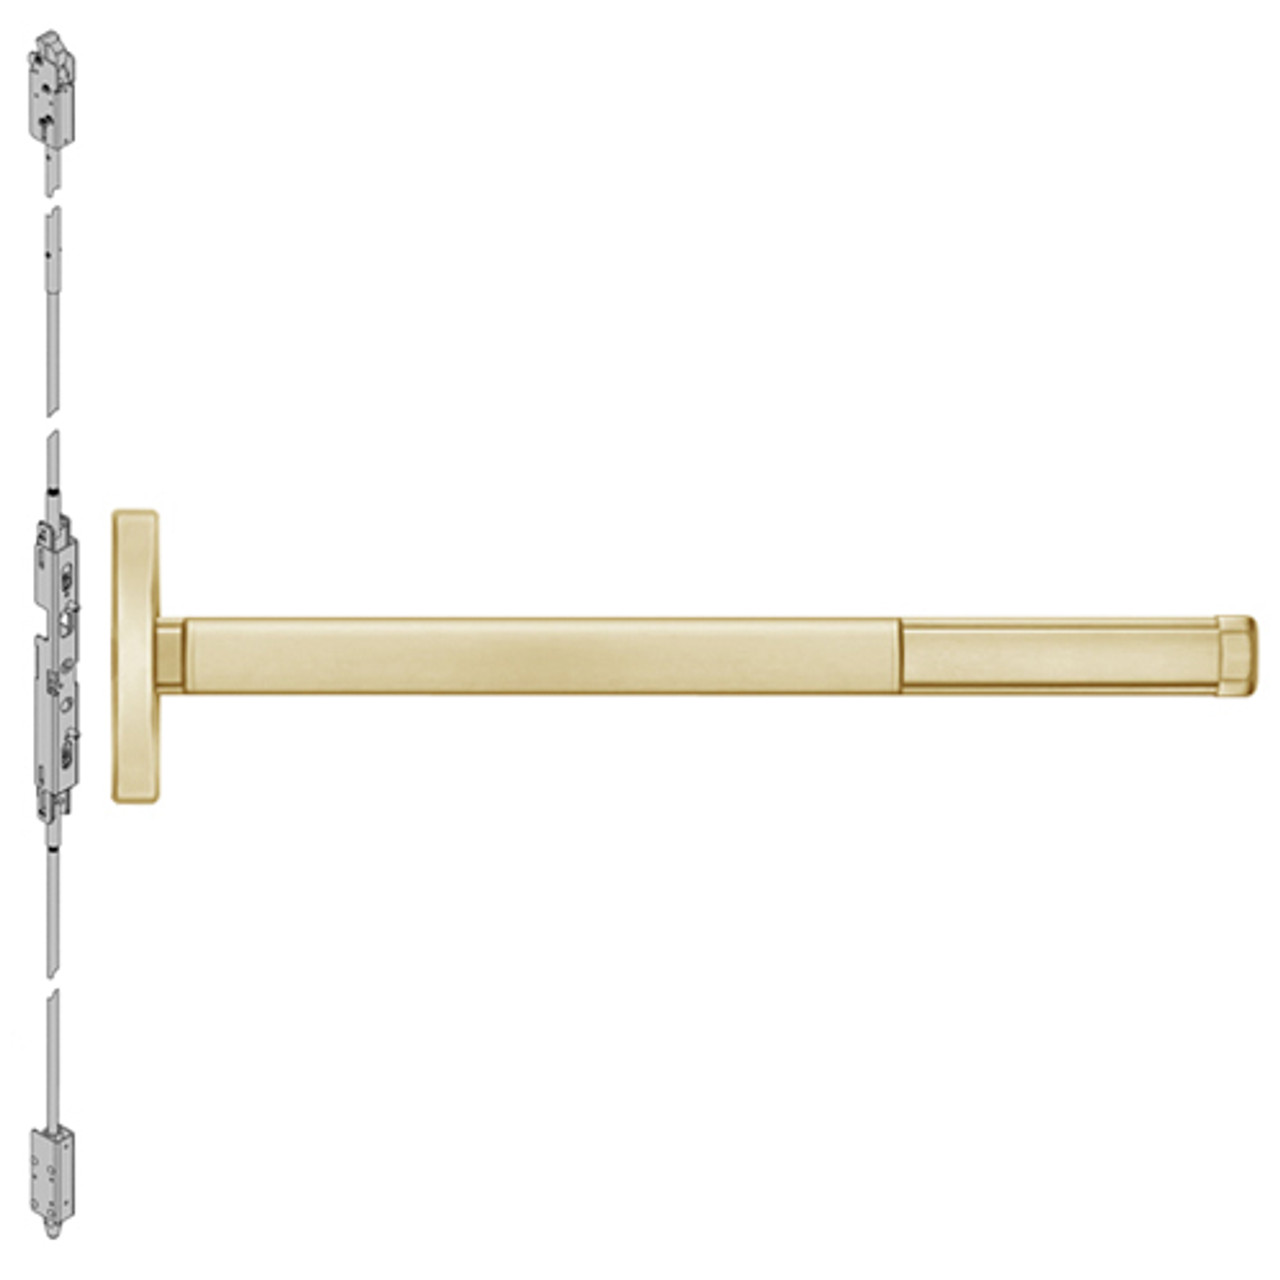 TS2614LBR-606-48 PHI 2600 Series Concealed Vertical Rod Exit Device with Touchbar Monitoring Switch Prepped for Lever Always Active in Satin Brass Finish